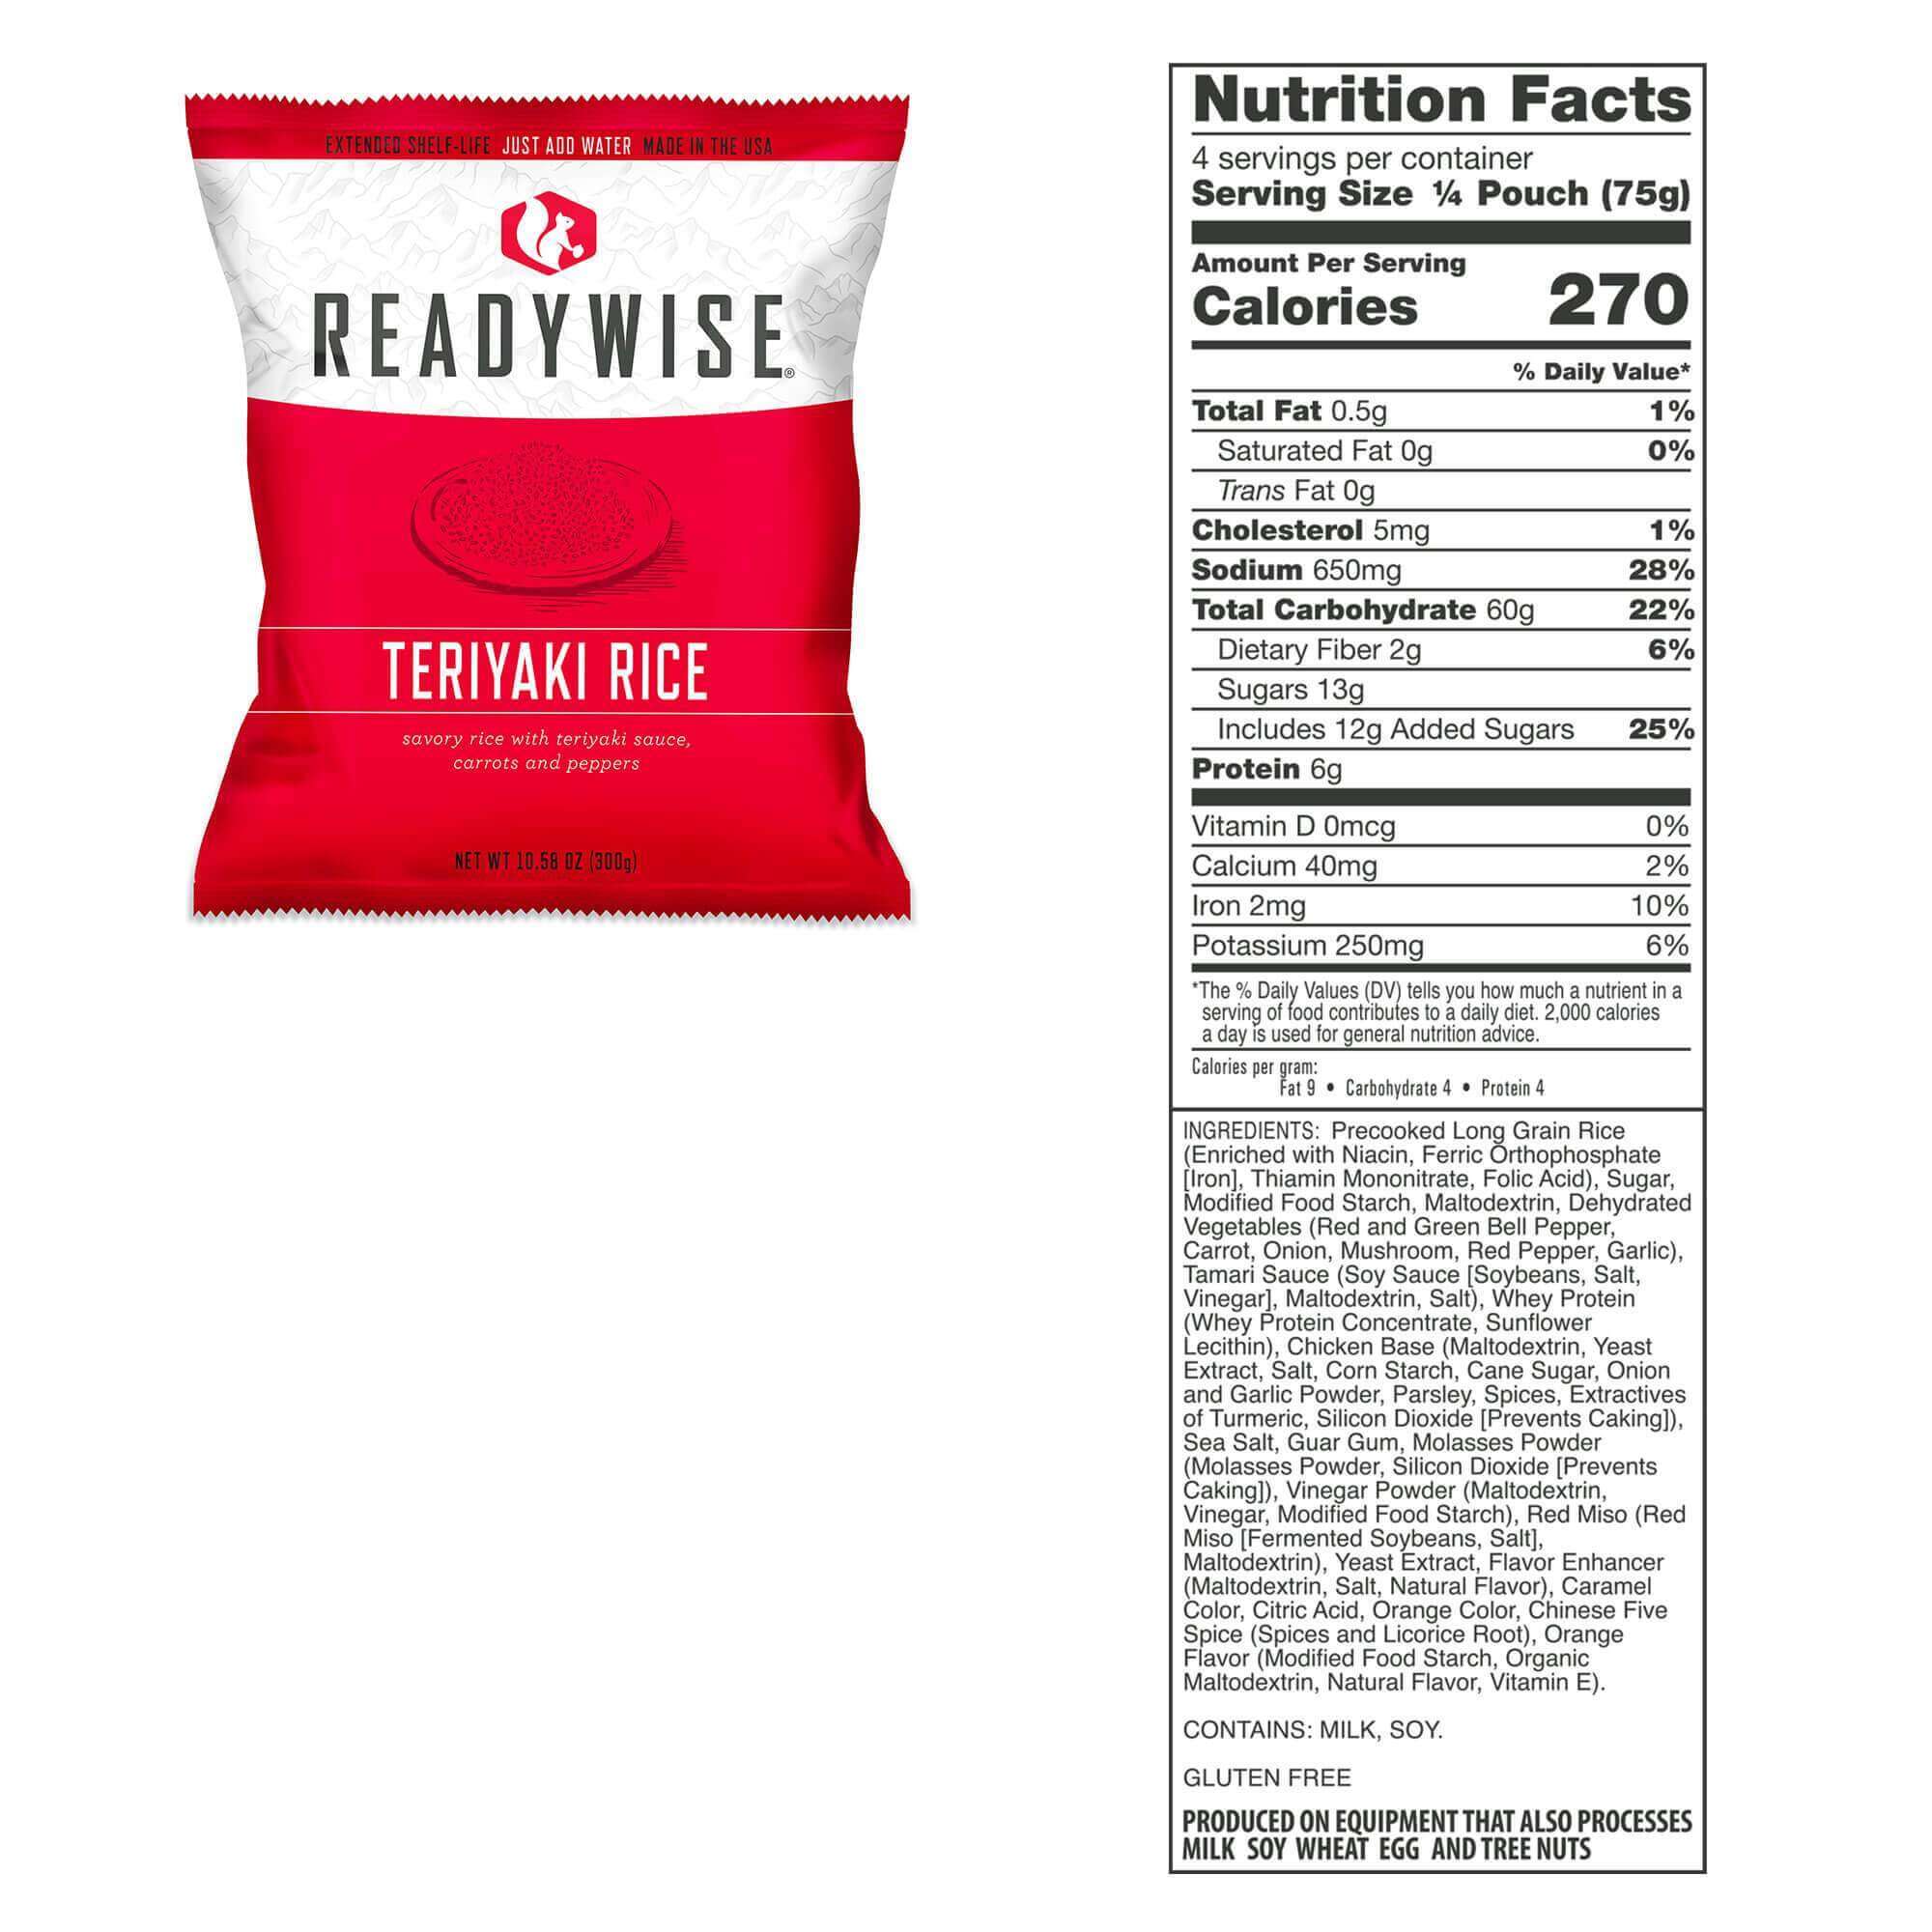 ReadyWise (formerly Wise Food Storage) 1 Year Kit for 2 People - 2160 Serving Package - 372 lbs - Includes 12 - 120 Serving Entree Buckets and 6 - 120 Serving Breakfast Buckets (SHIPS IN 1-2 WEEKS) Readywise readywise readywise readywise readywise ReadyWise (formerly Wise Food Storage)...